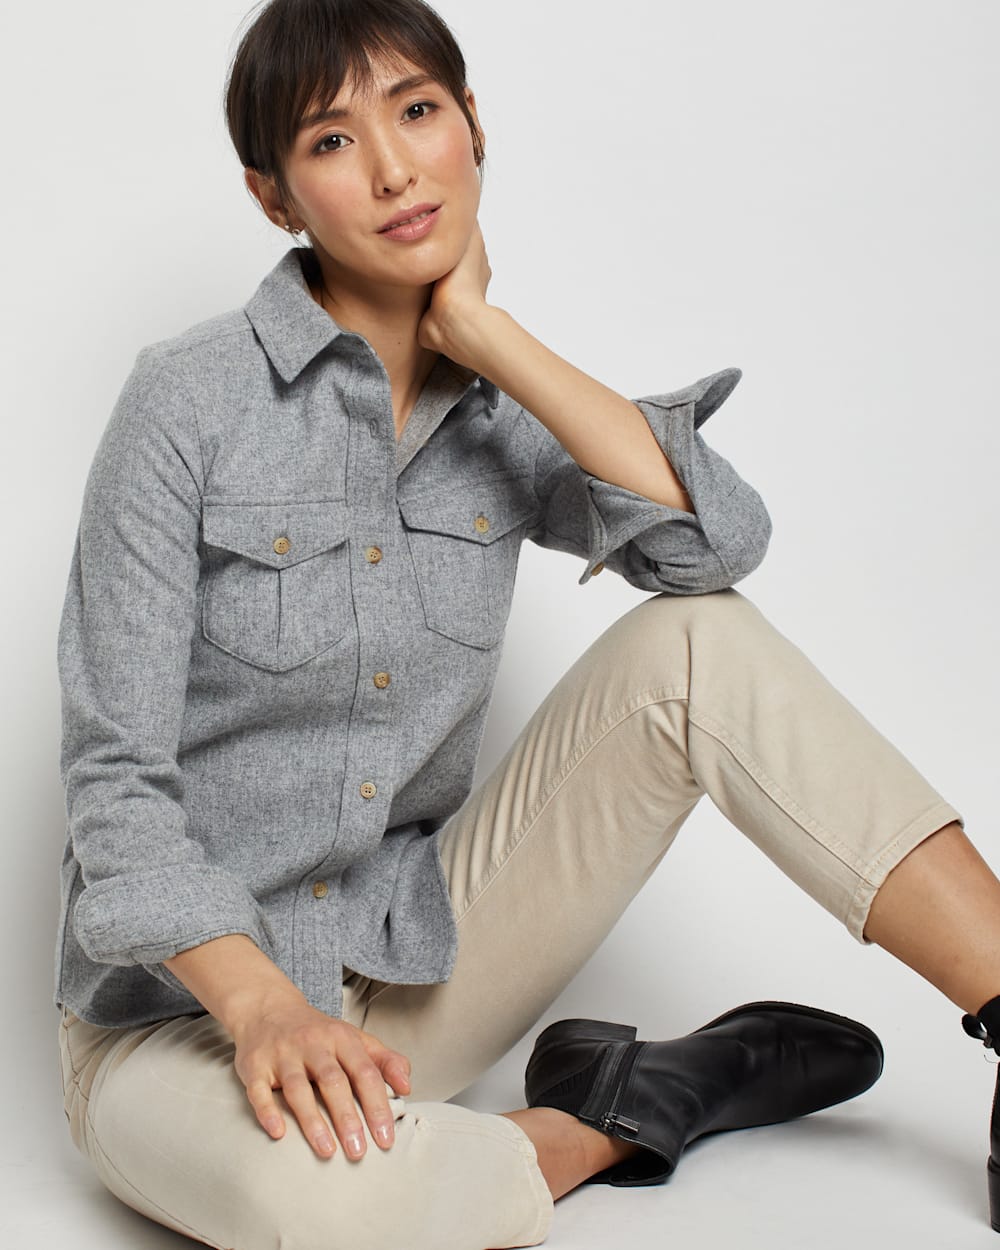 ALTERNATE VIEW OF WOMEN'S LAUREL WOOL SHIRT IN GREY MIX SOLID image number 2